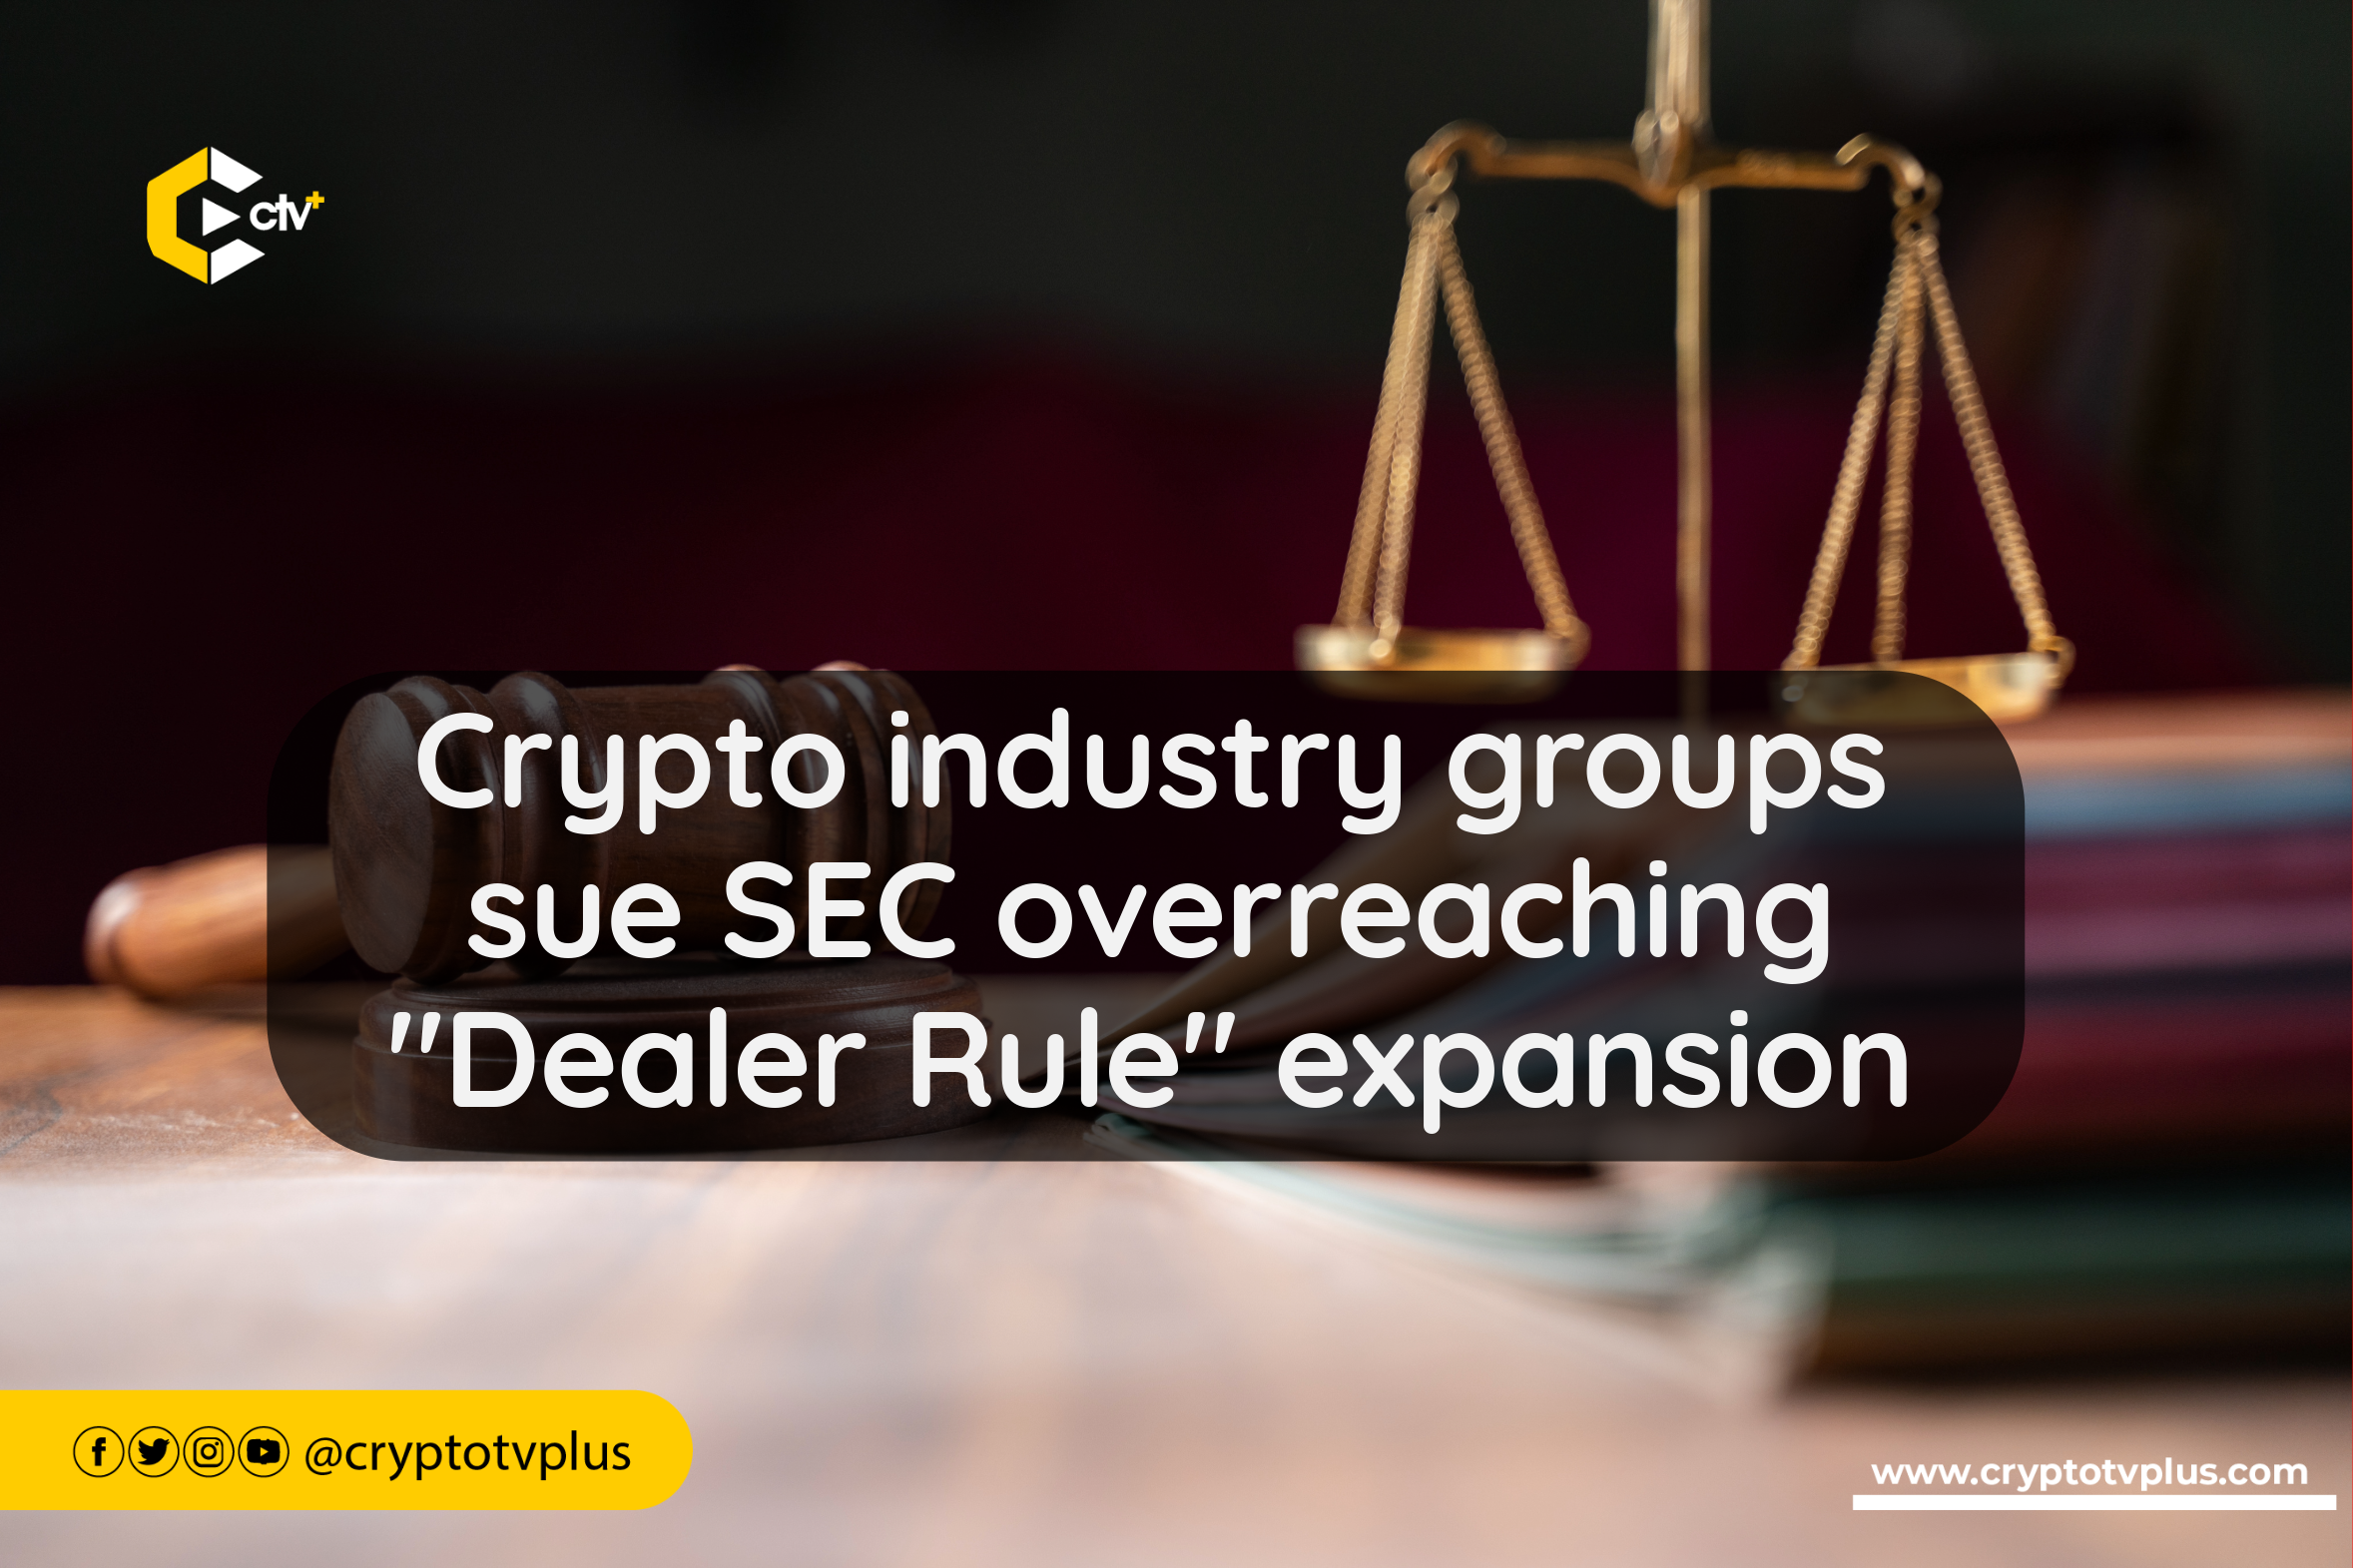 Crypto industry associations are taking legal action against the SEC, challenging the expansion of the "Dealer Rule" as an overreach by the agency.